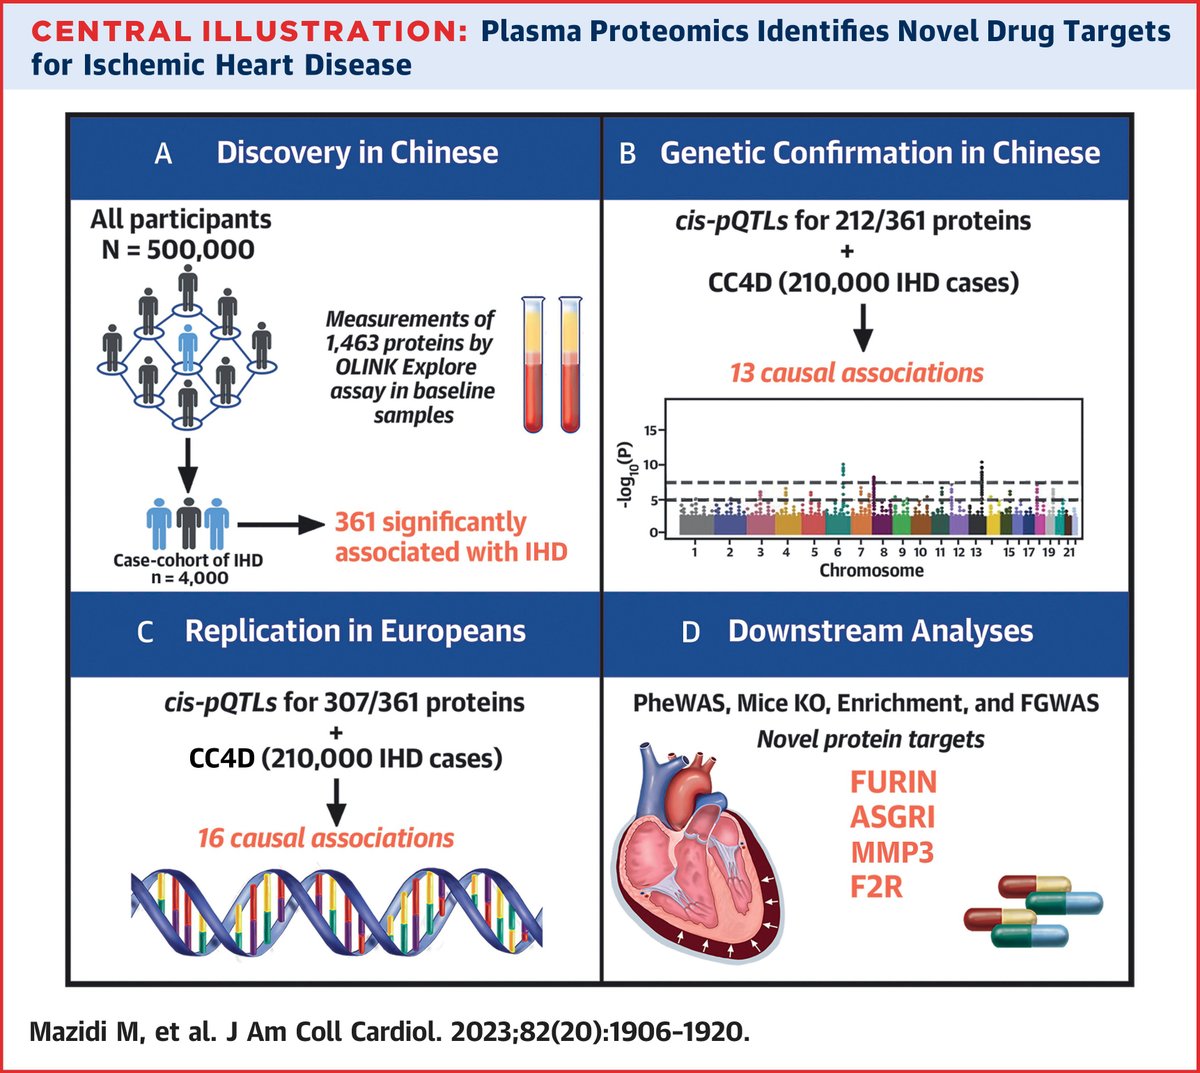 Integrated analyses of proteomic and genetic data in Chinese and European adults provided causal support for FURIN and multiple other proteins as potential novel drug targets for the treatment of #IschemicHeartDisease. bit.ly/40wImYr

#JACC #ACCIntl #CardioTwitter